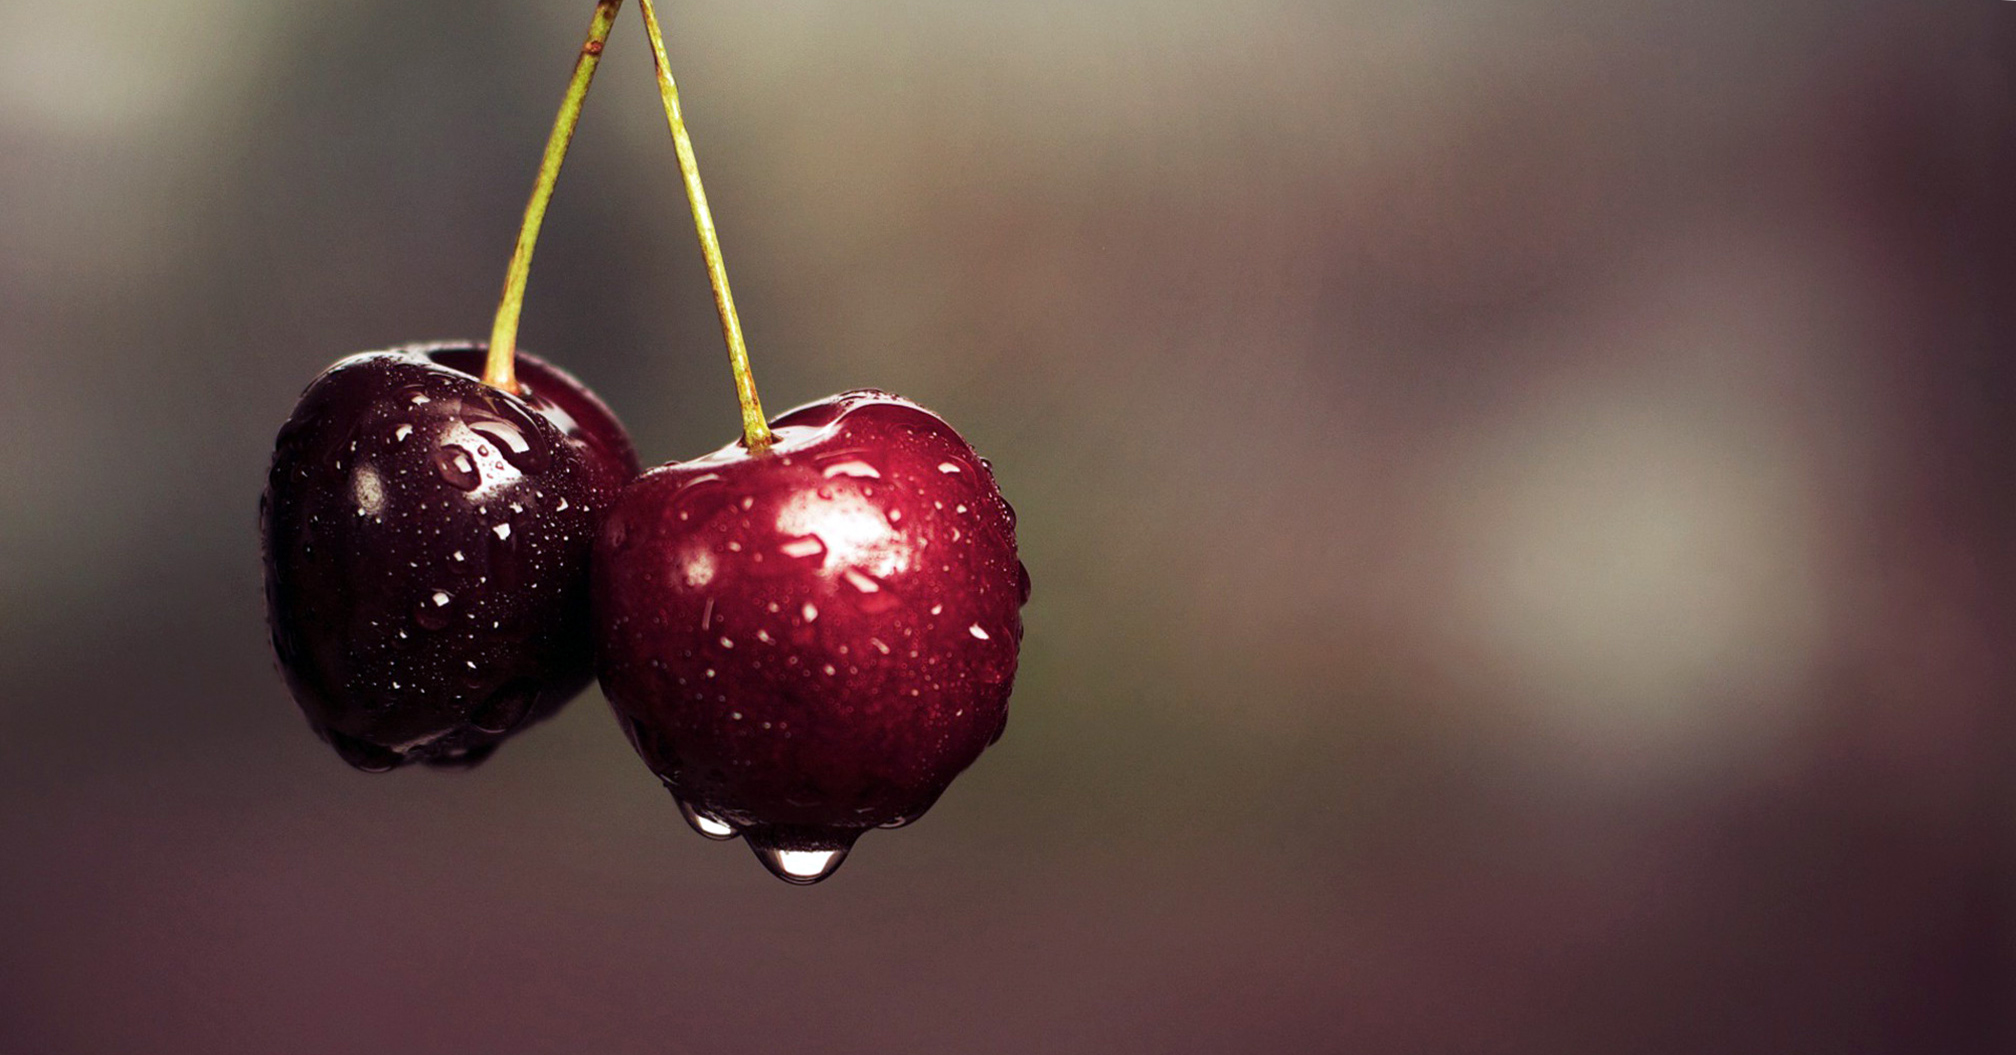 cherry wallpaper,cherry,fruit,natural foods,plant,food